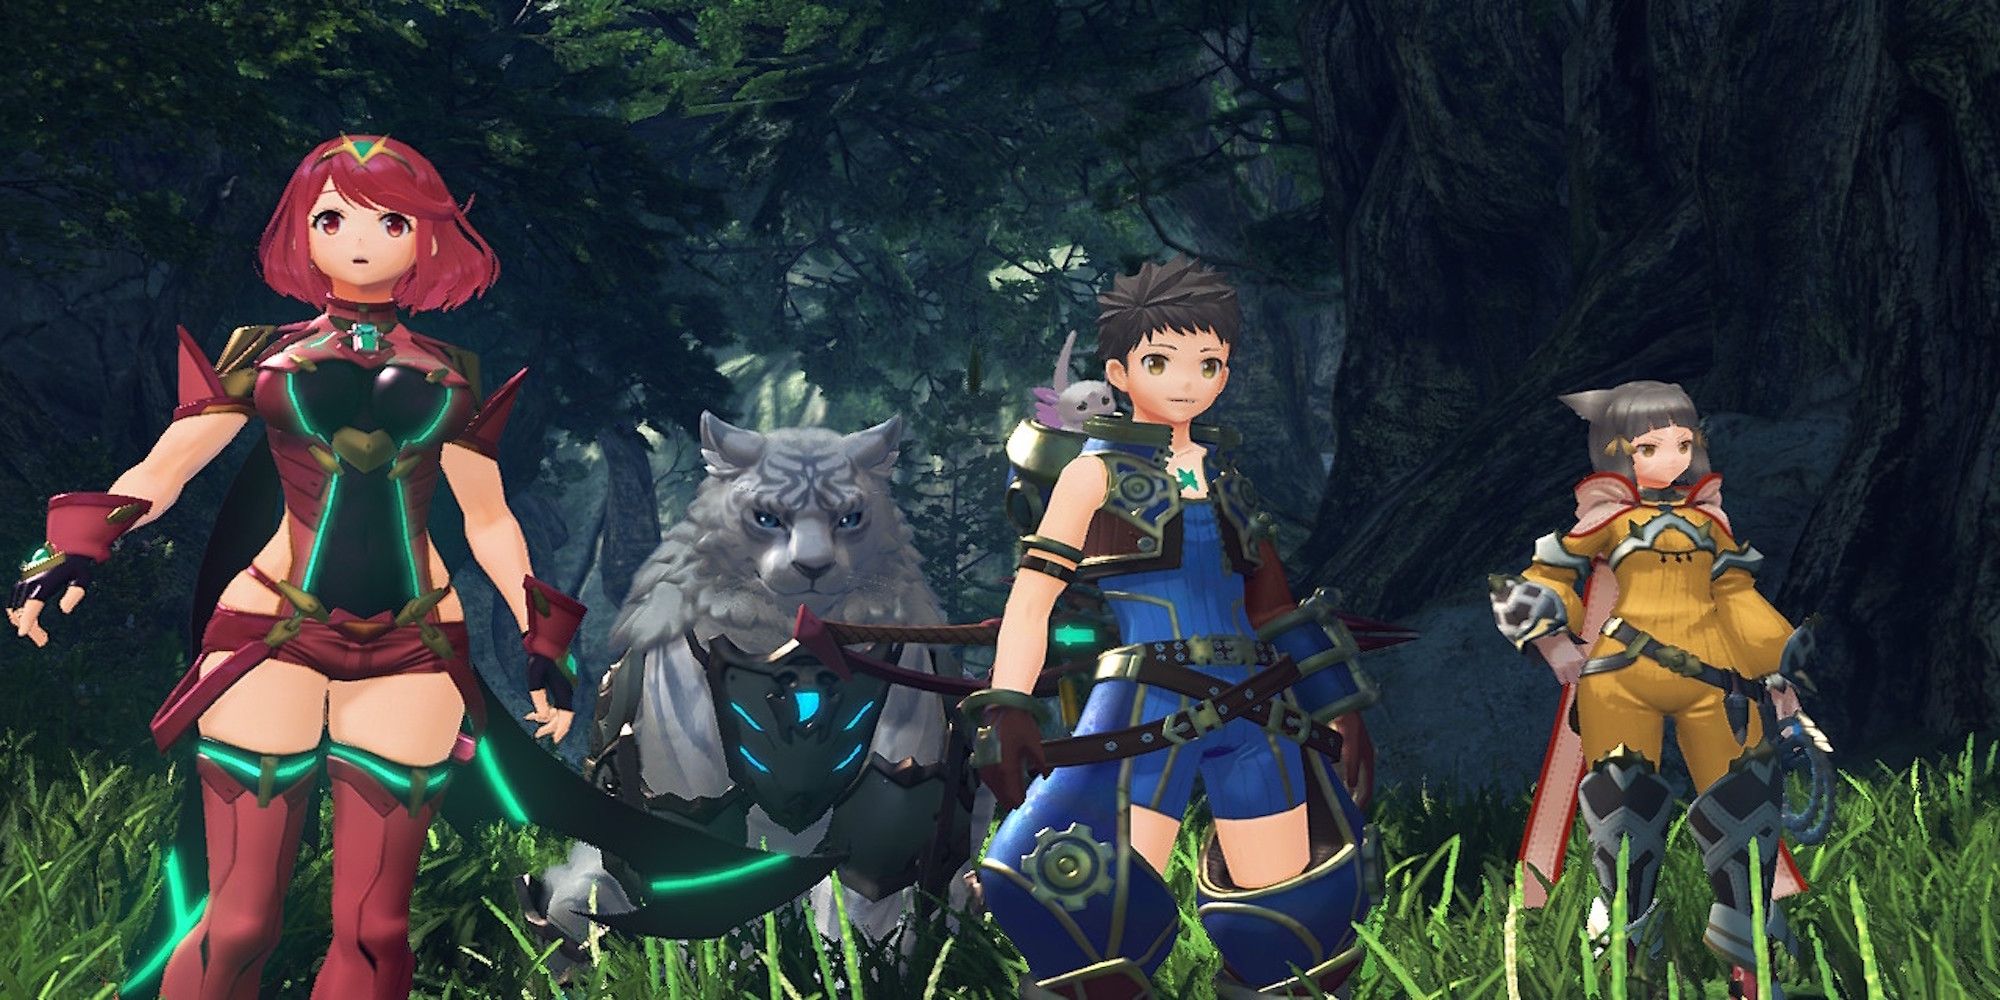 A cutscene featuring characters in Xenoblade Chronicles 2